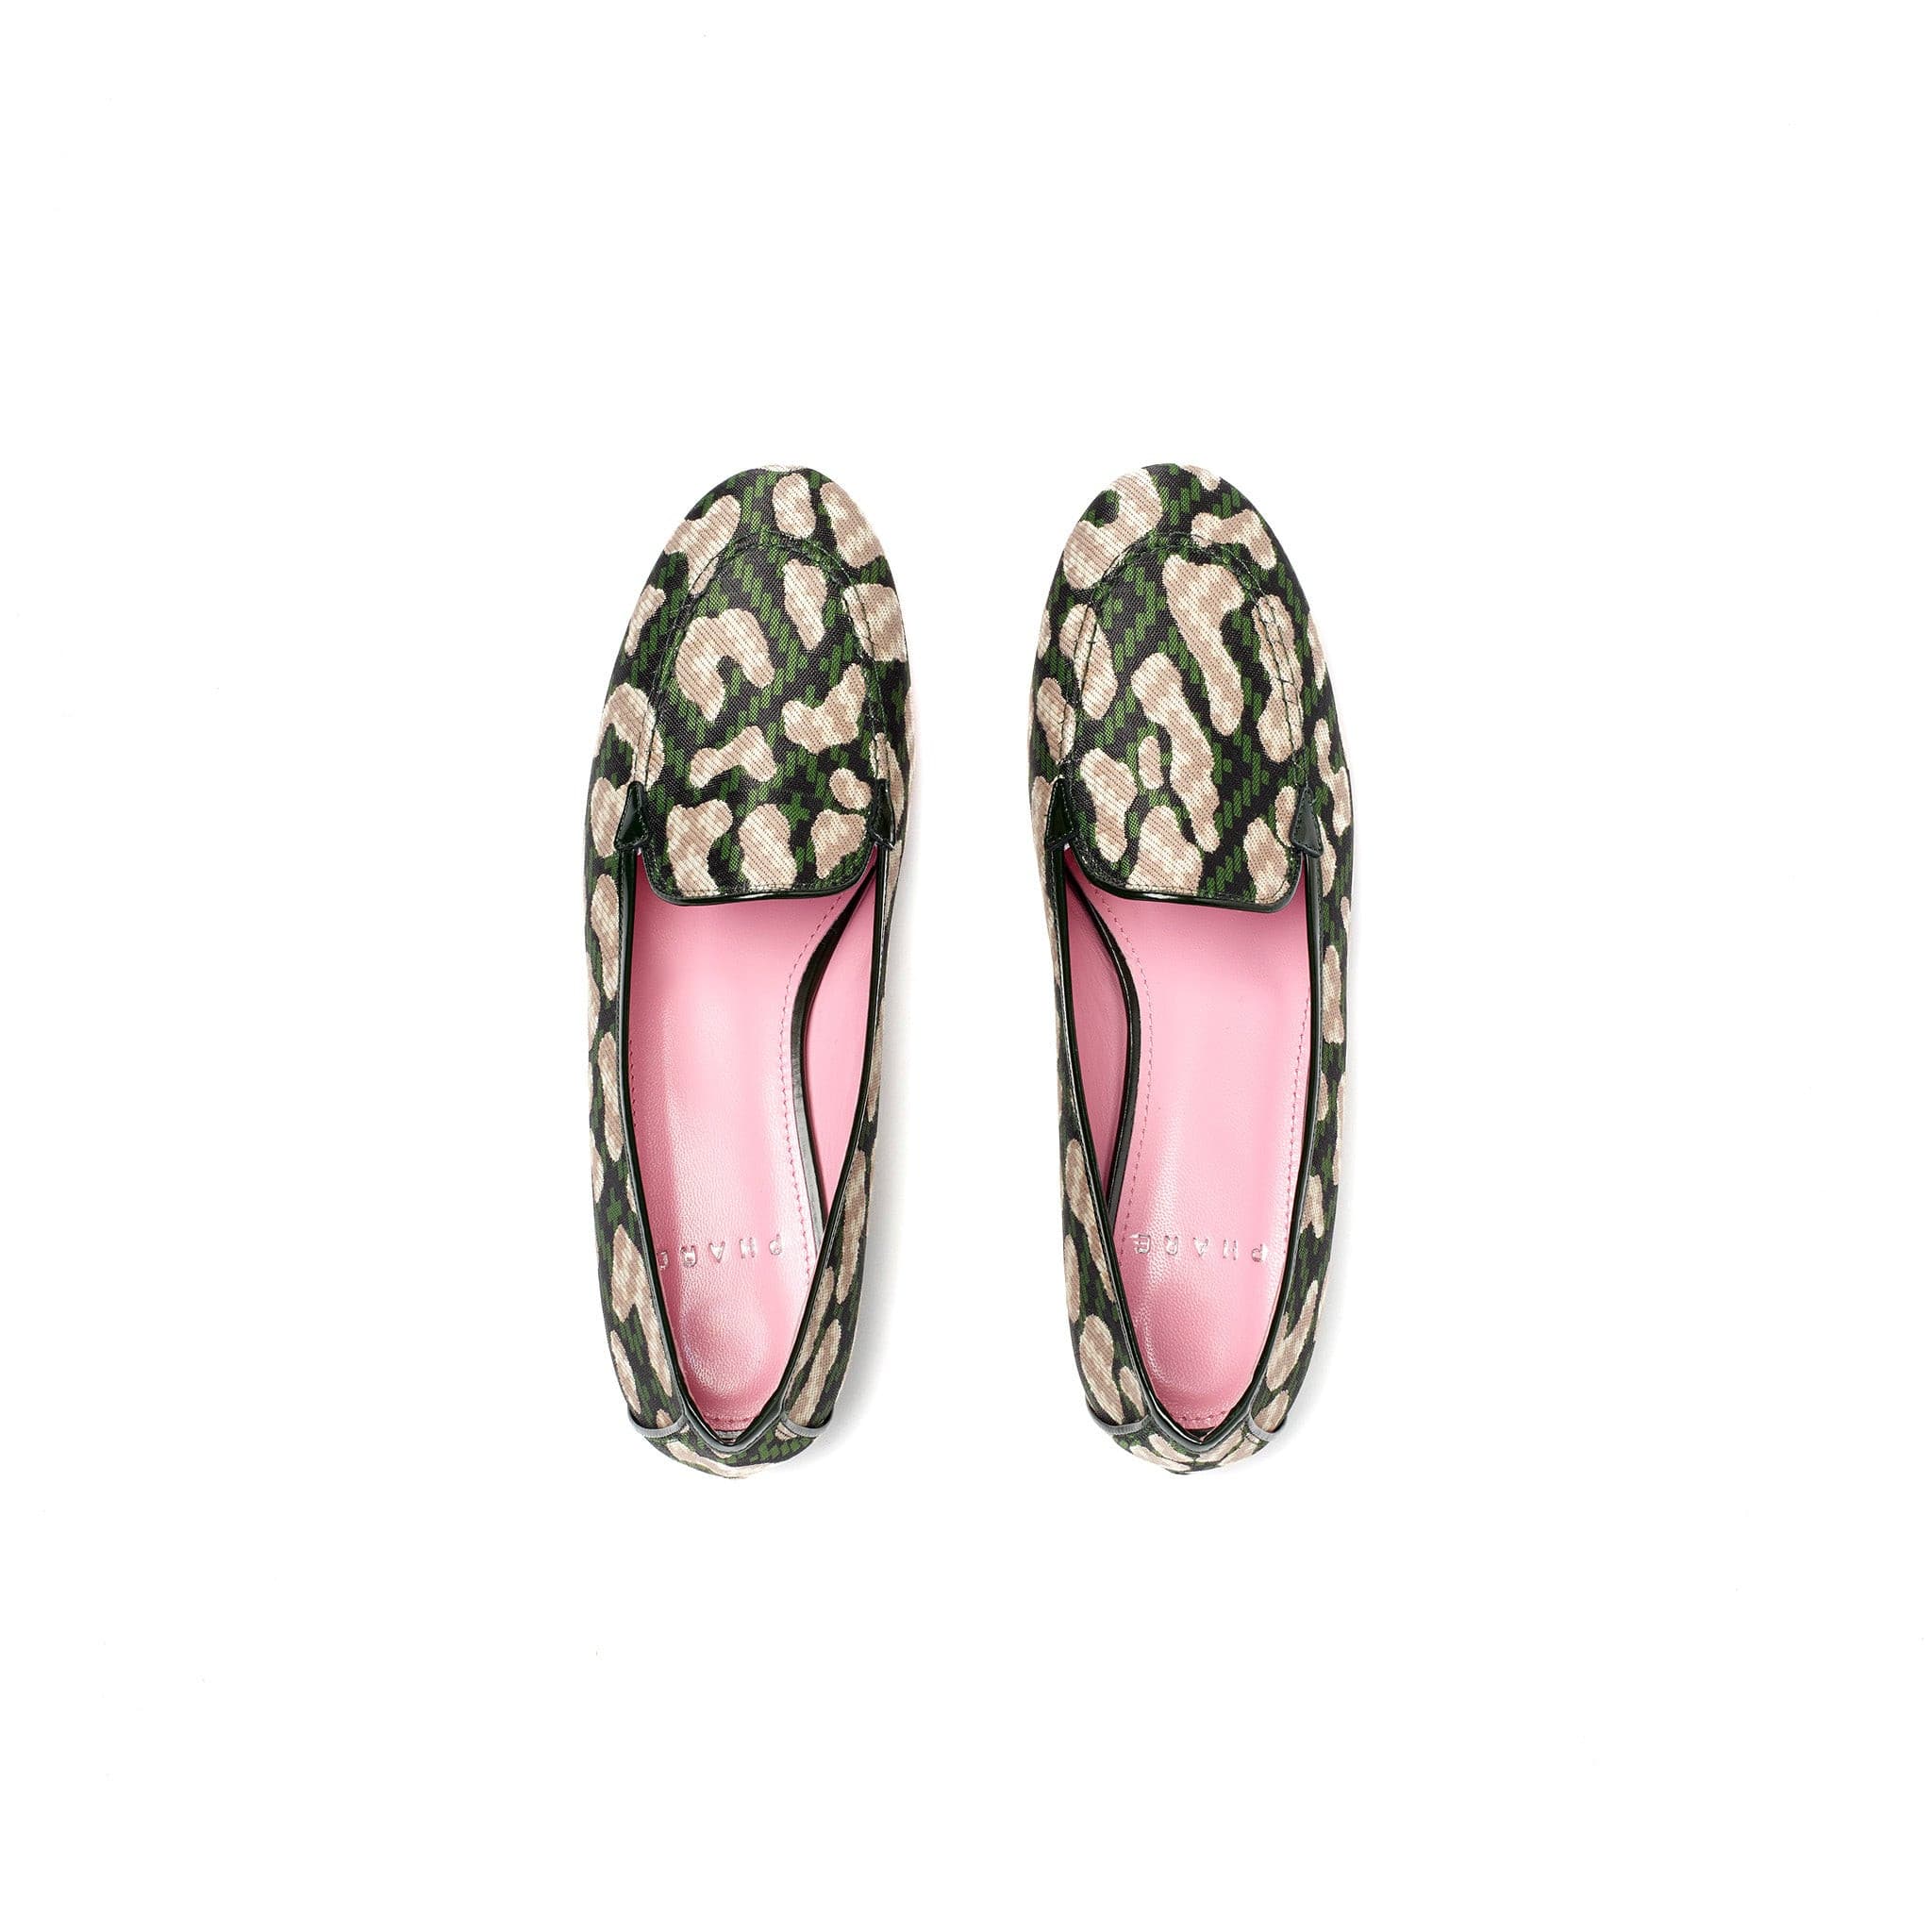 Phare classic loafer in dark green leopard jacquard top view 